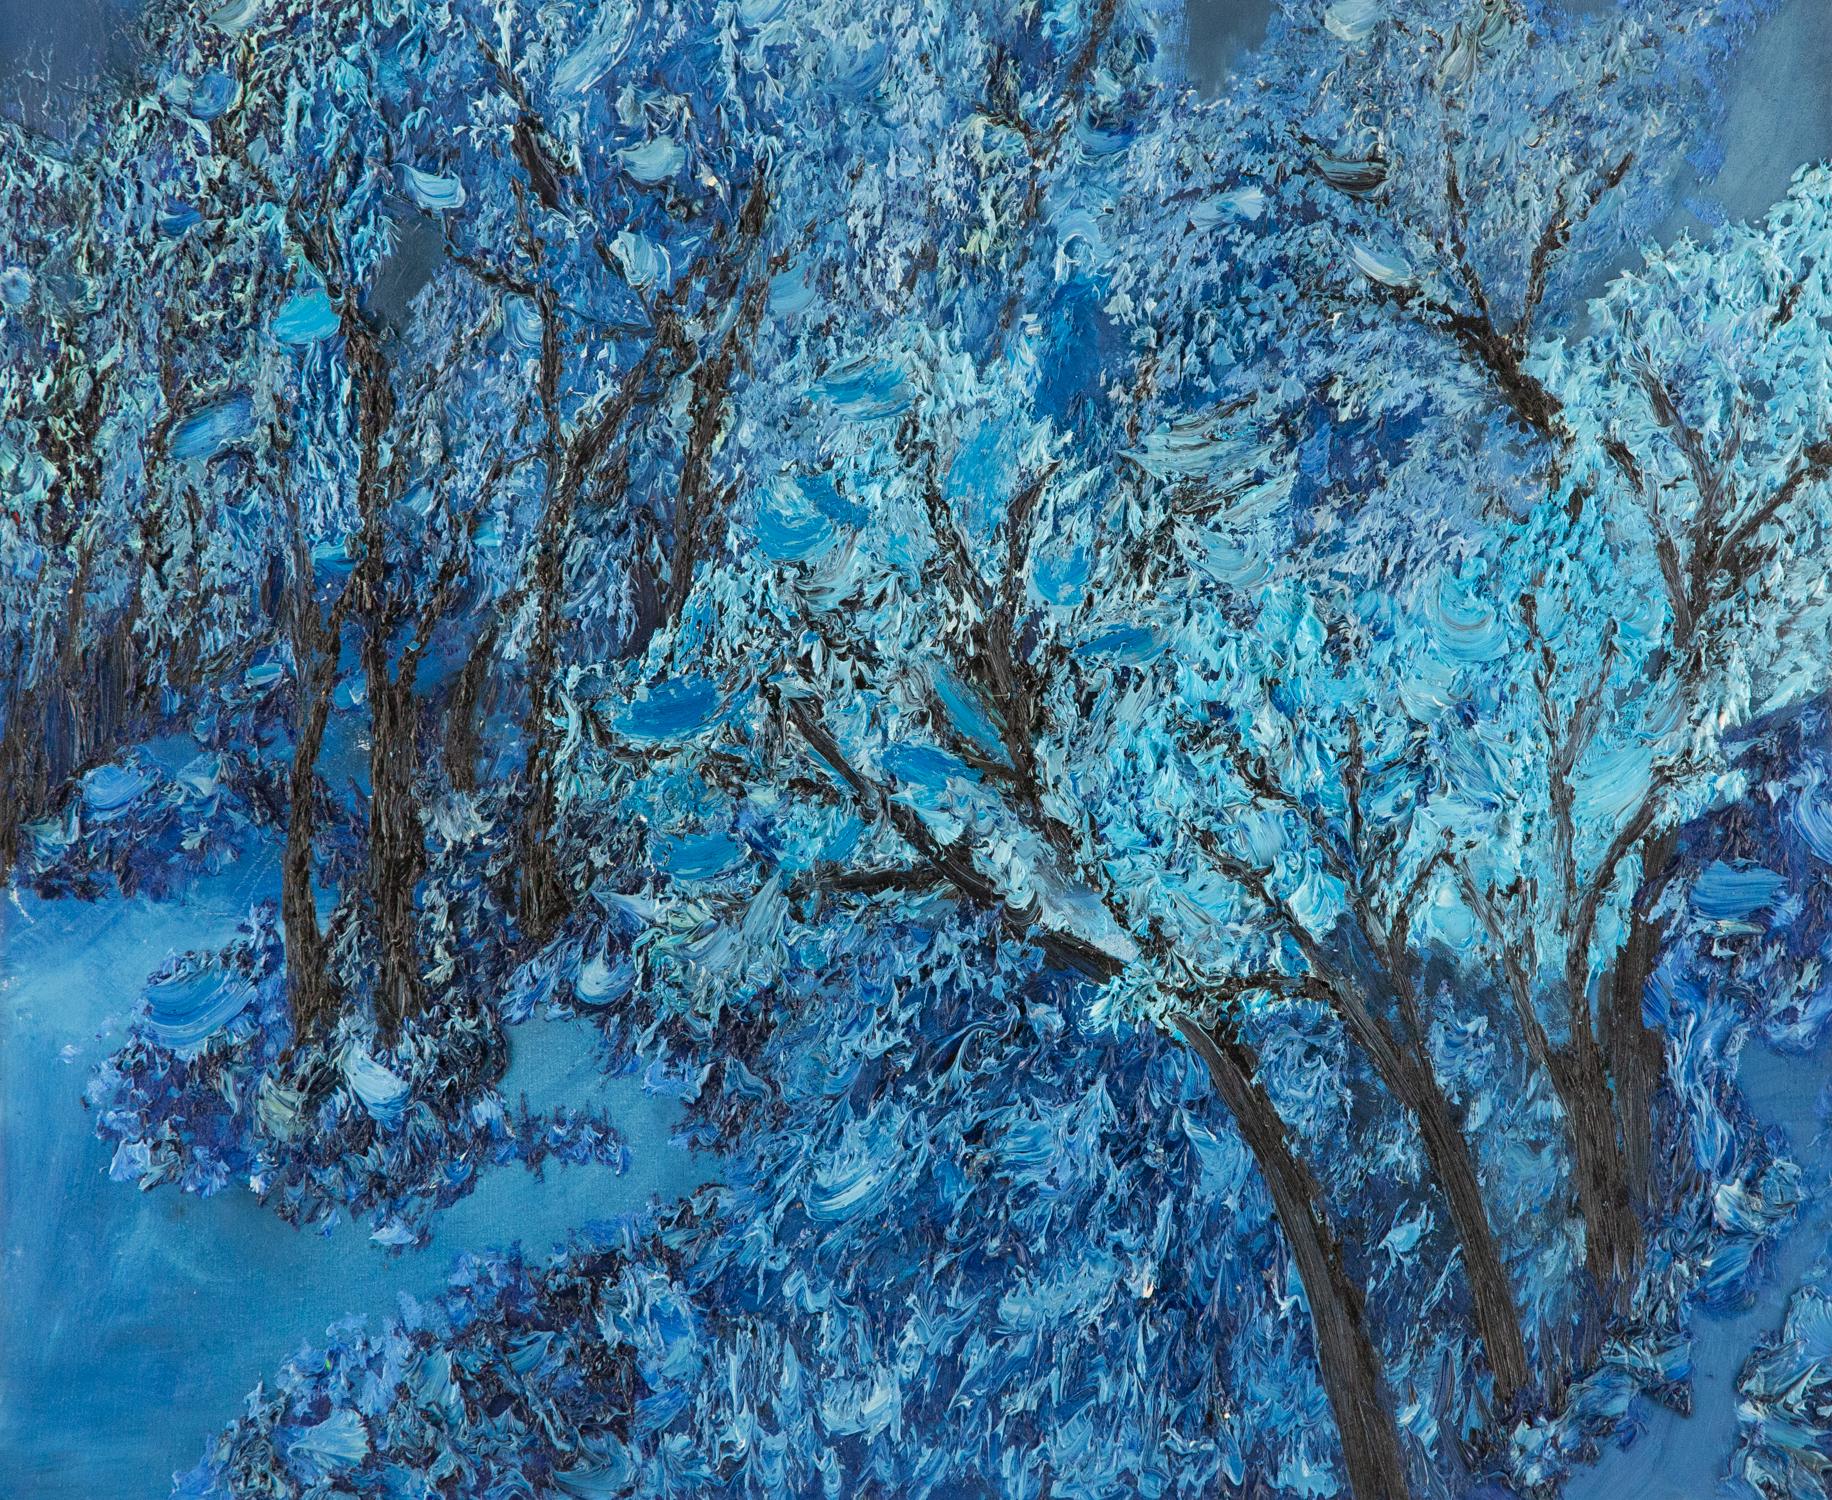 Title: The Blue Forest
Medium: Oil on canvas
Size: 20 x 23 inches
Frame: Framing options available!
Condition: The painting appears to be in excellent condition.
Note: This painting is unstretched
Year: 2000 Circa
Artist: Ning Guoqiang
Signature: